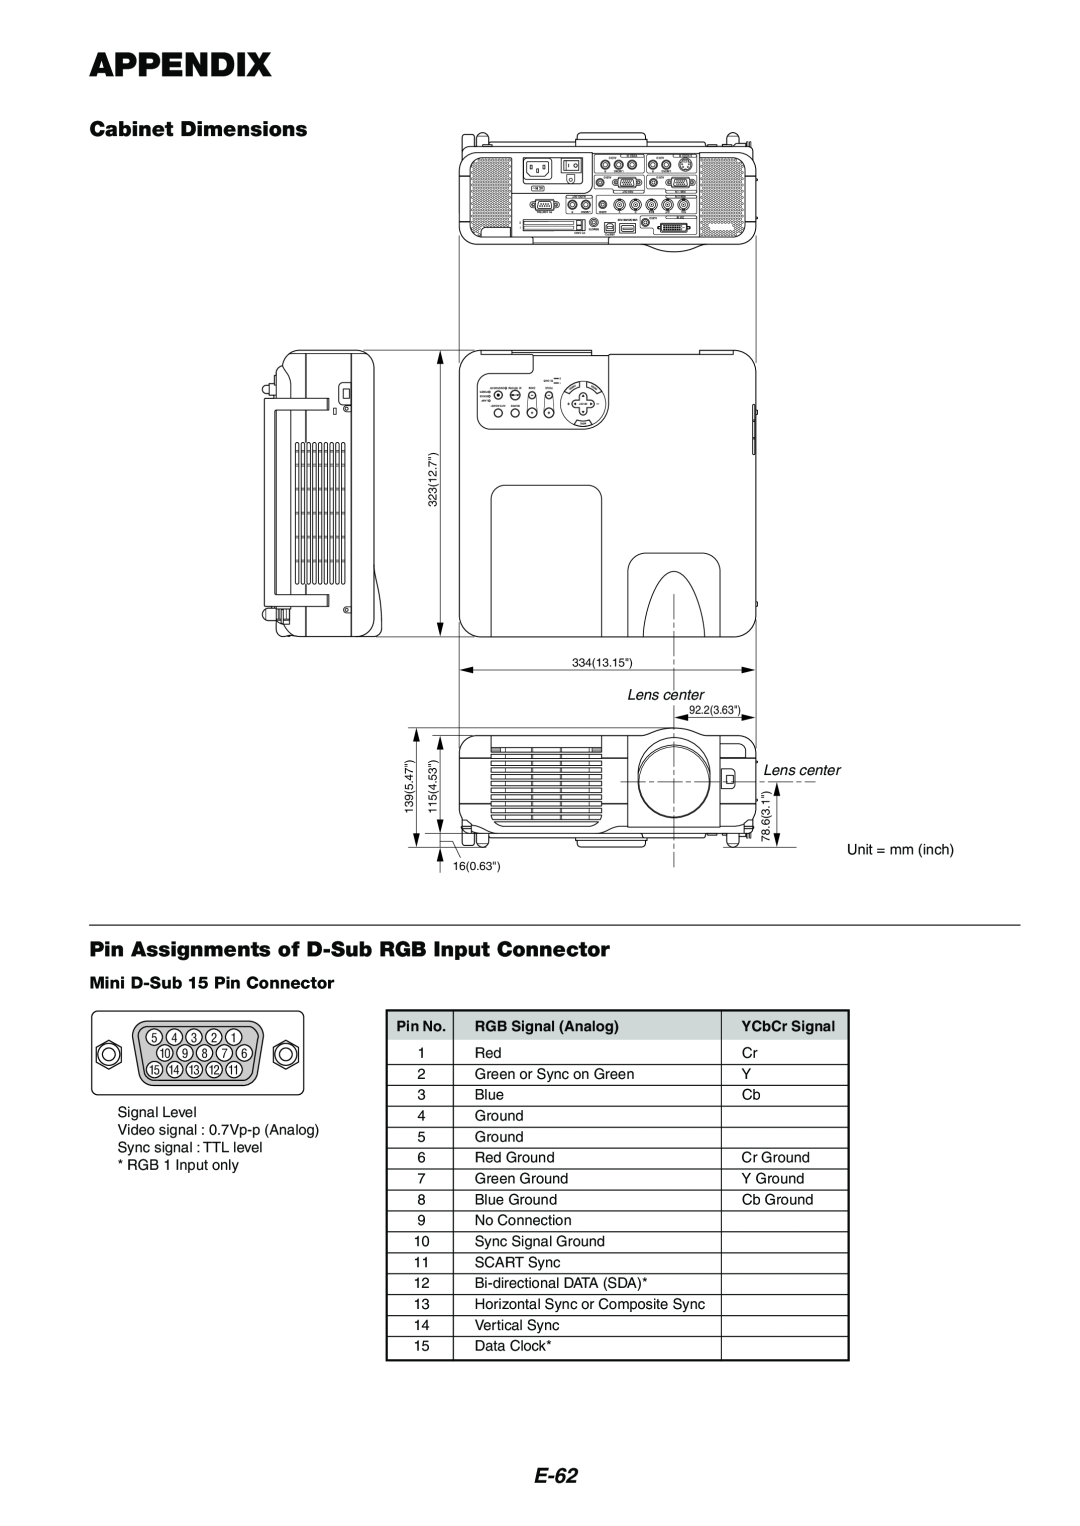 Kensington MT1075 Appendix, Cabinet Dimensions, Pin Assignments of D-SubRGB Input Connector, E-62, Pin No, YCbCr Signal 